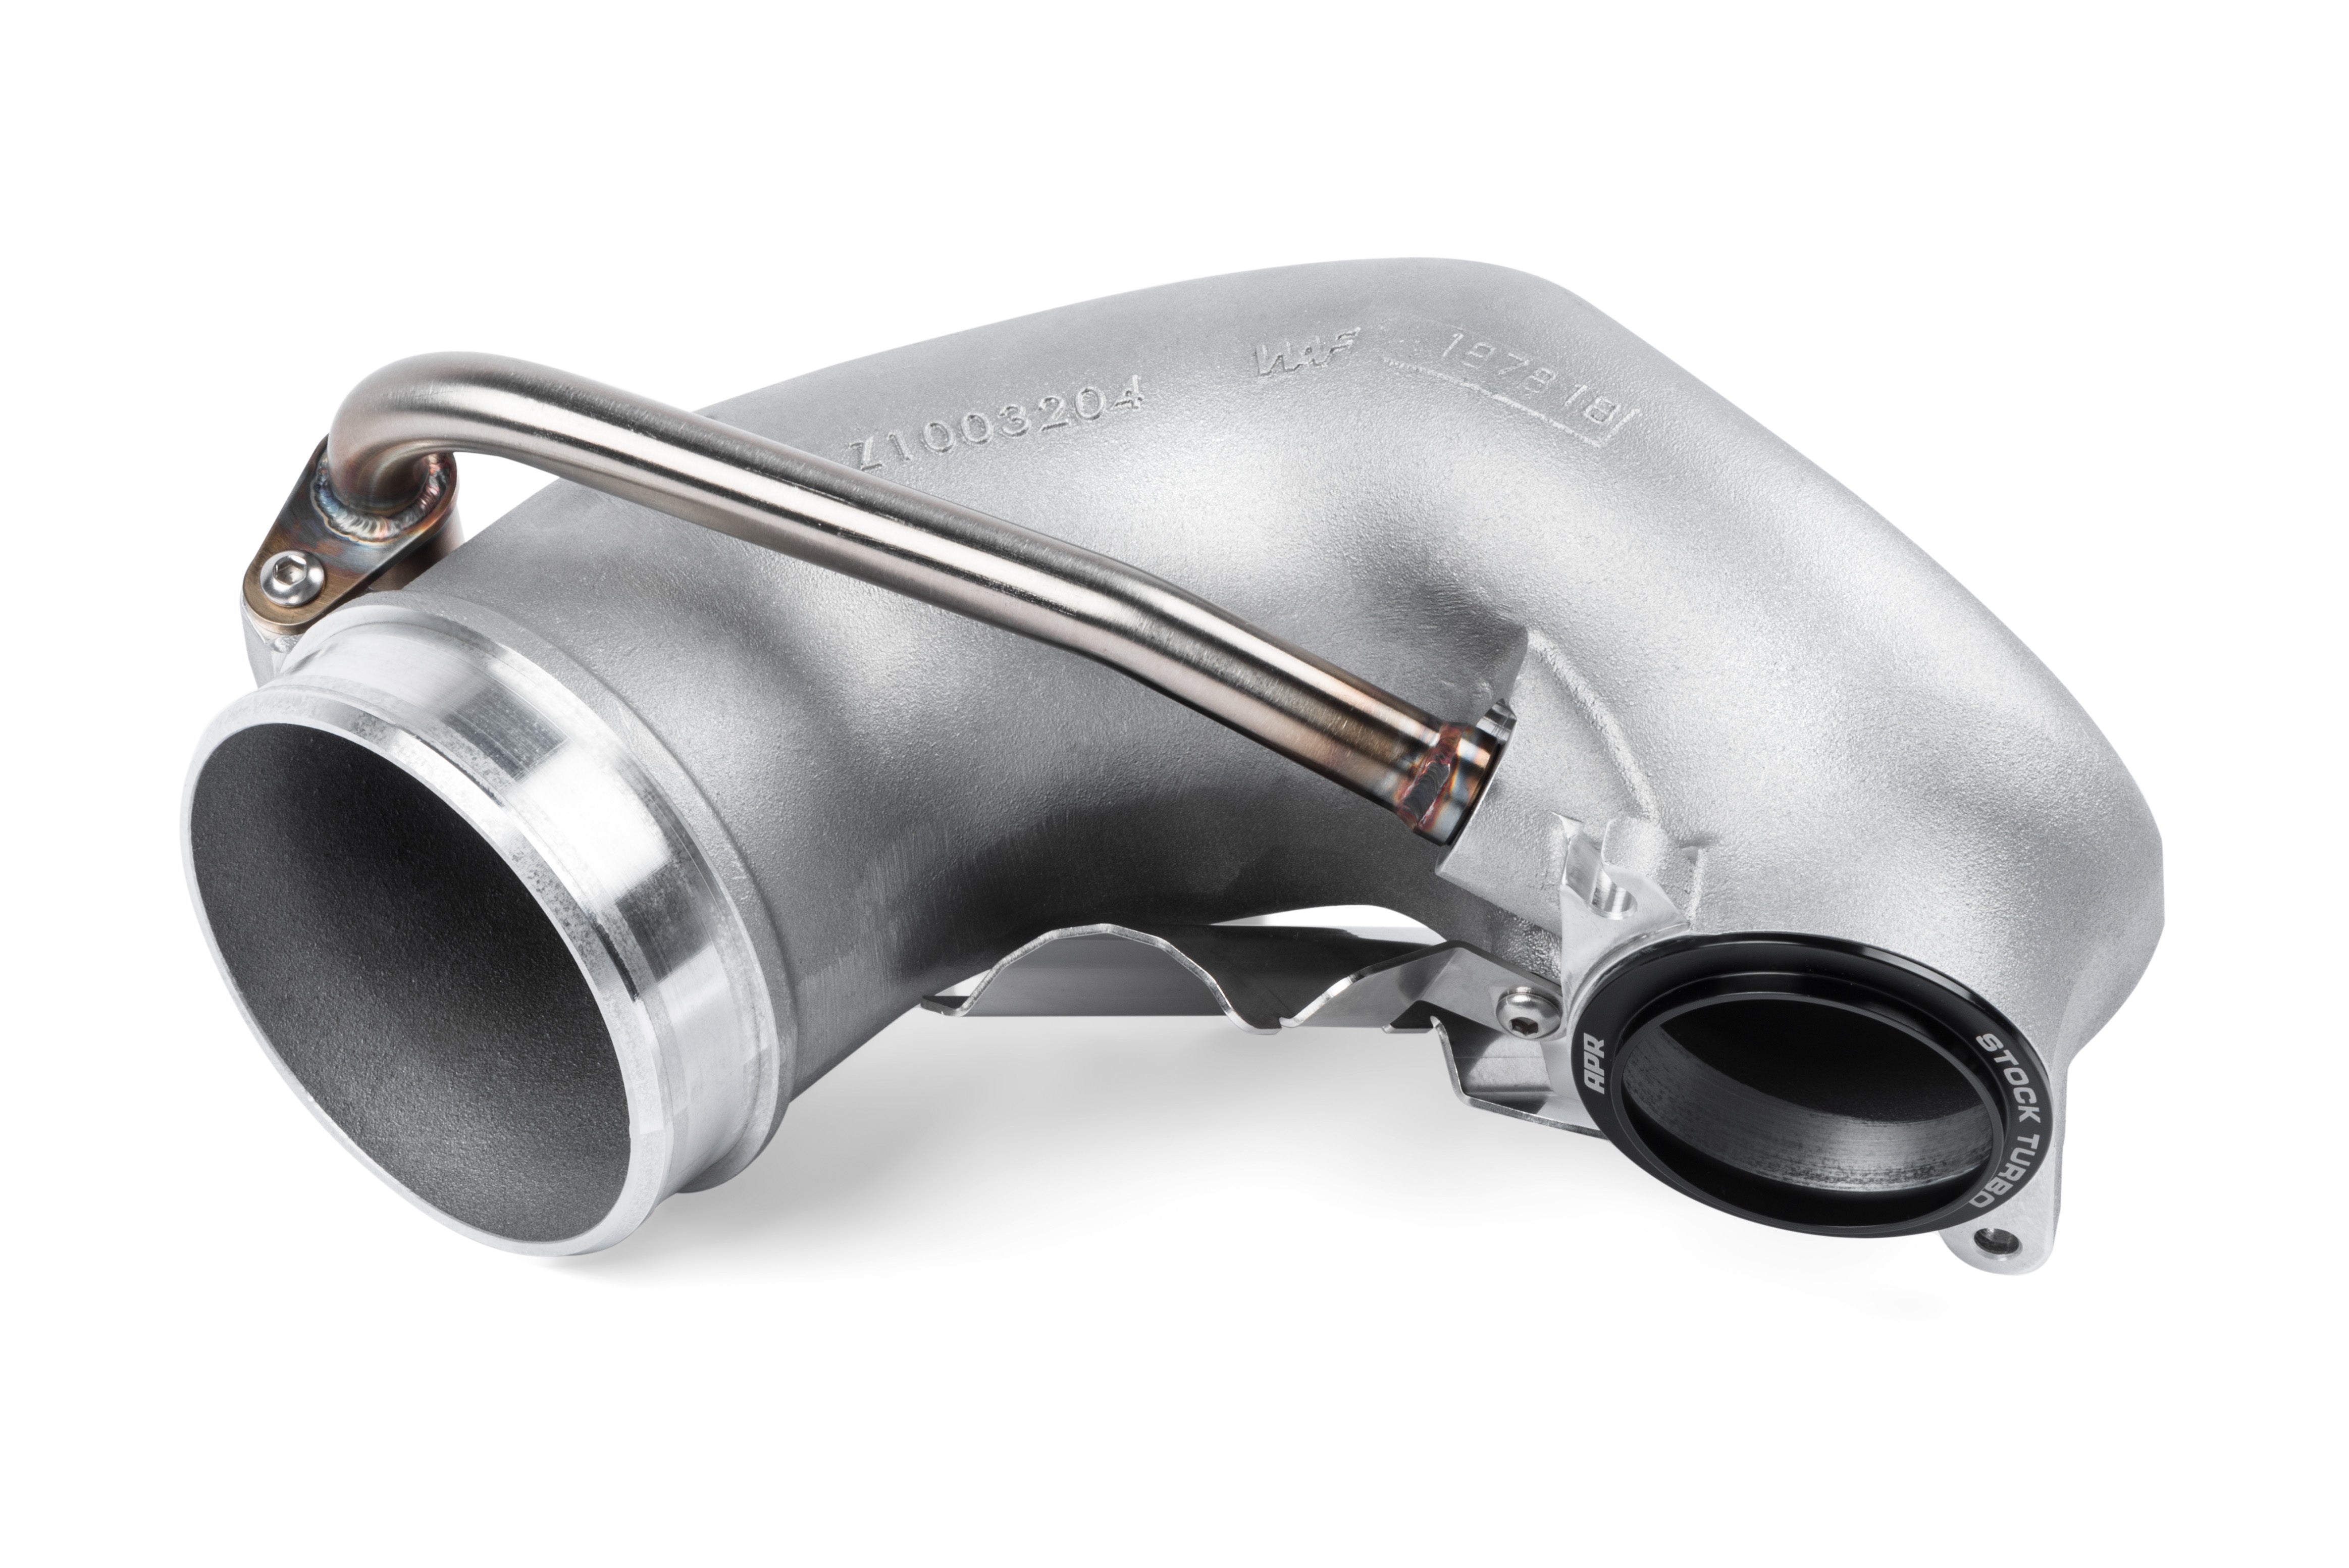 APR Turbo Inlet Pipe